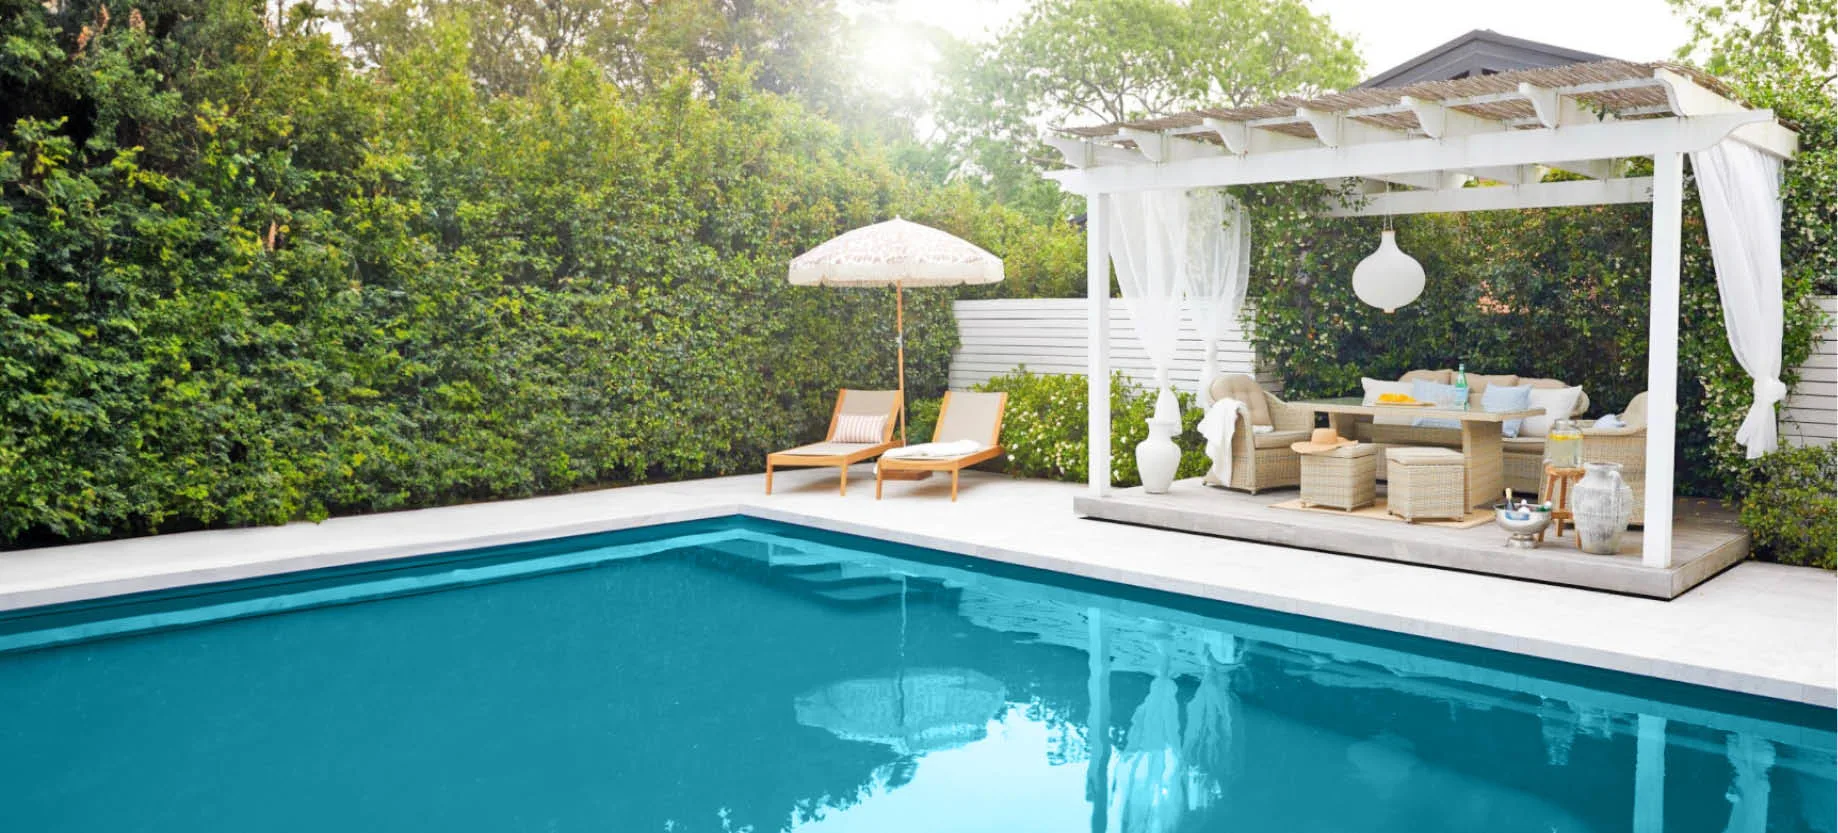 Set up comfortable seating and dining areas poolside for ultimate relaxation and entertainment